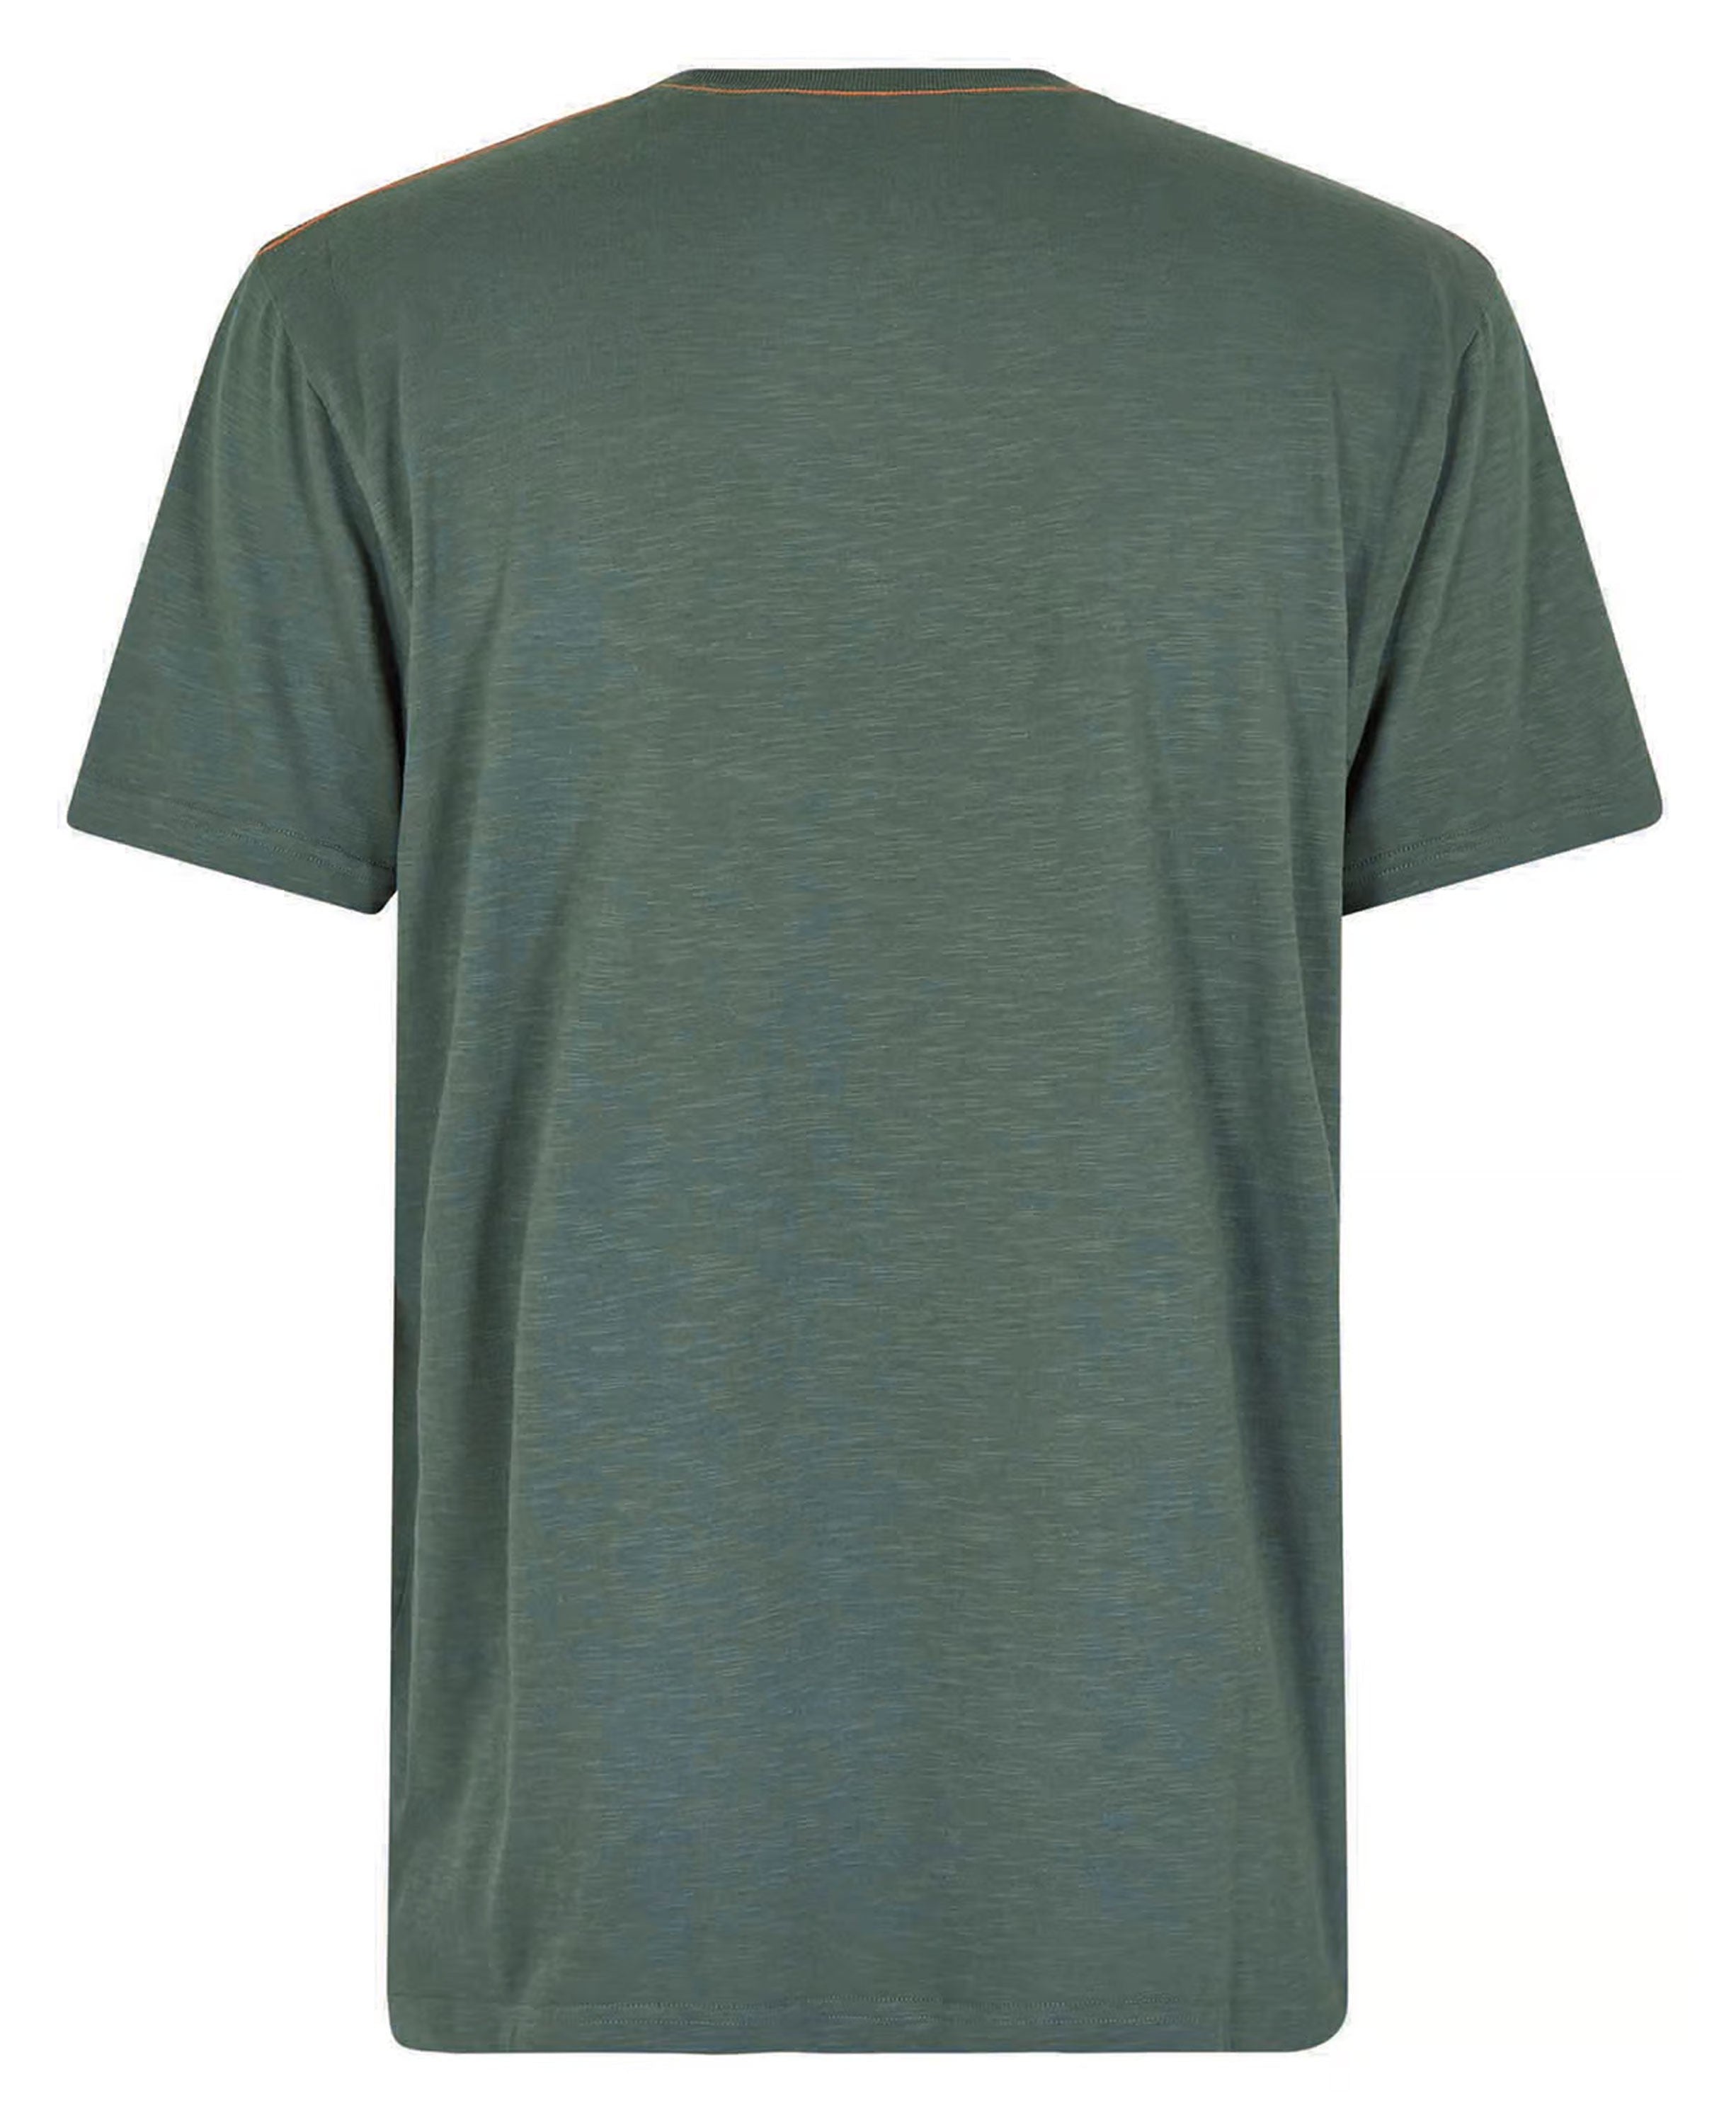 Fished Organic Branded Tee - Dusky Green